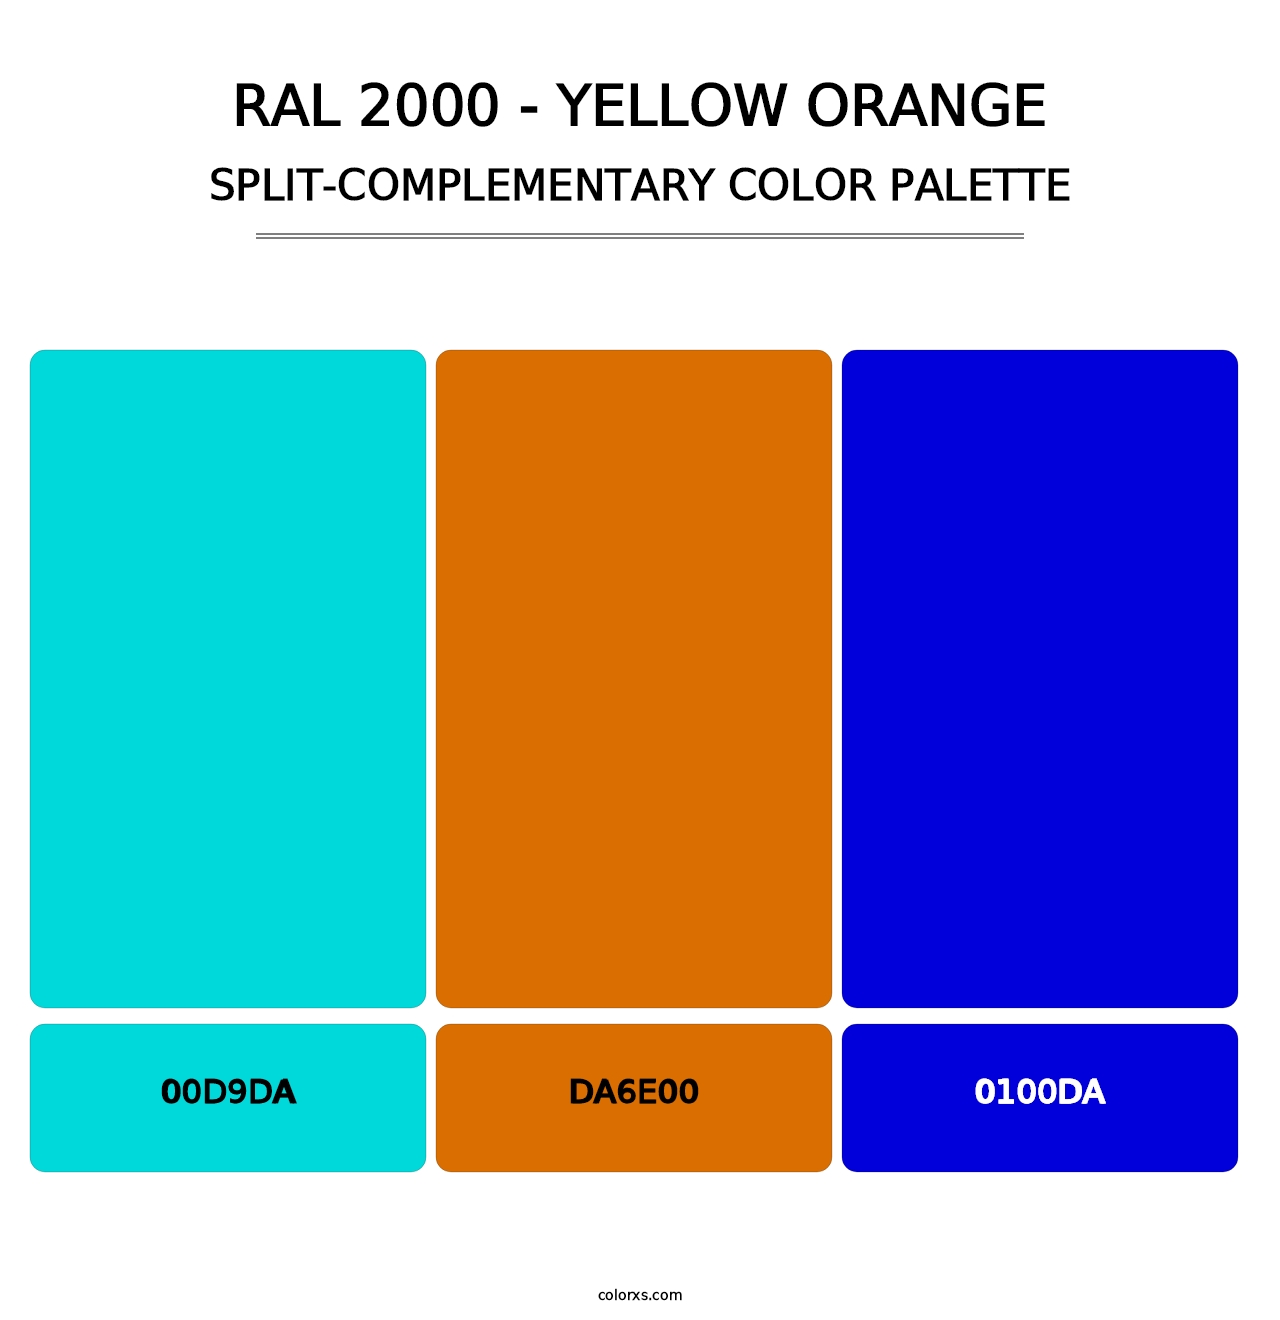 RAL 2000 - Yellow Orange - Split-Complementary Color Palette